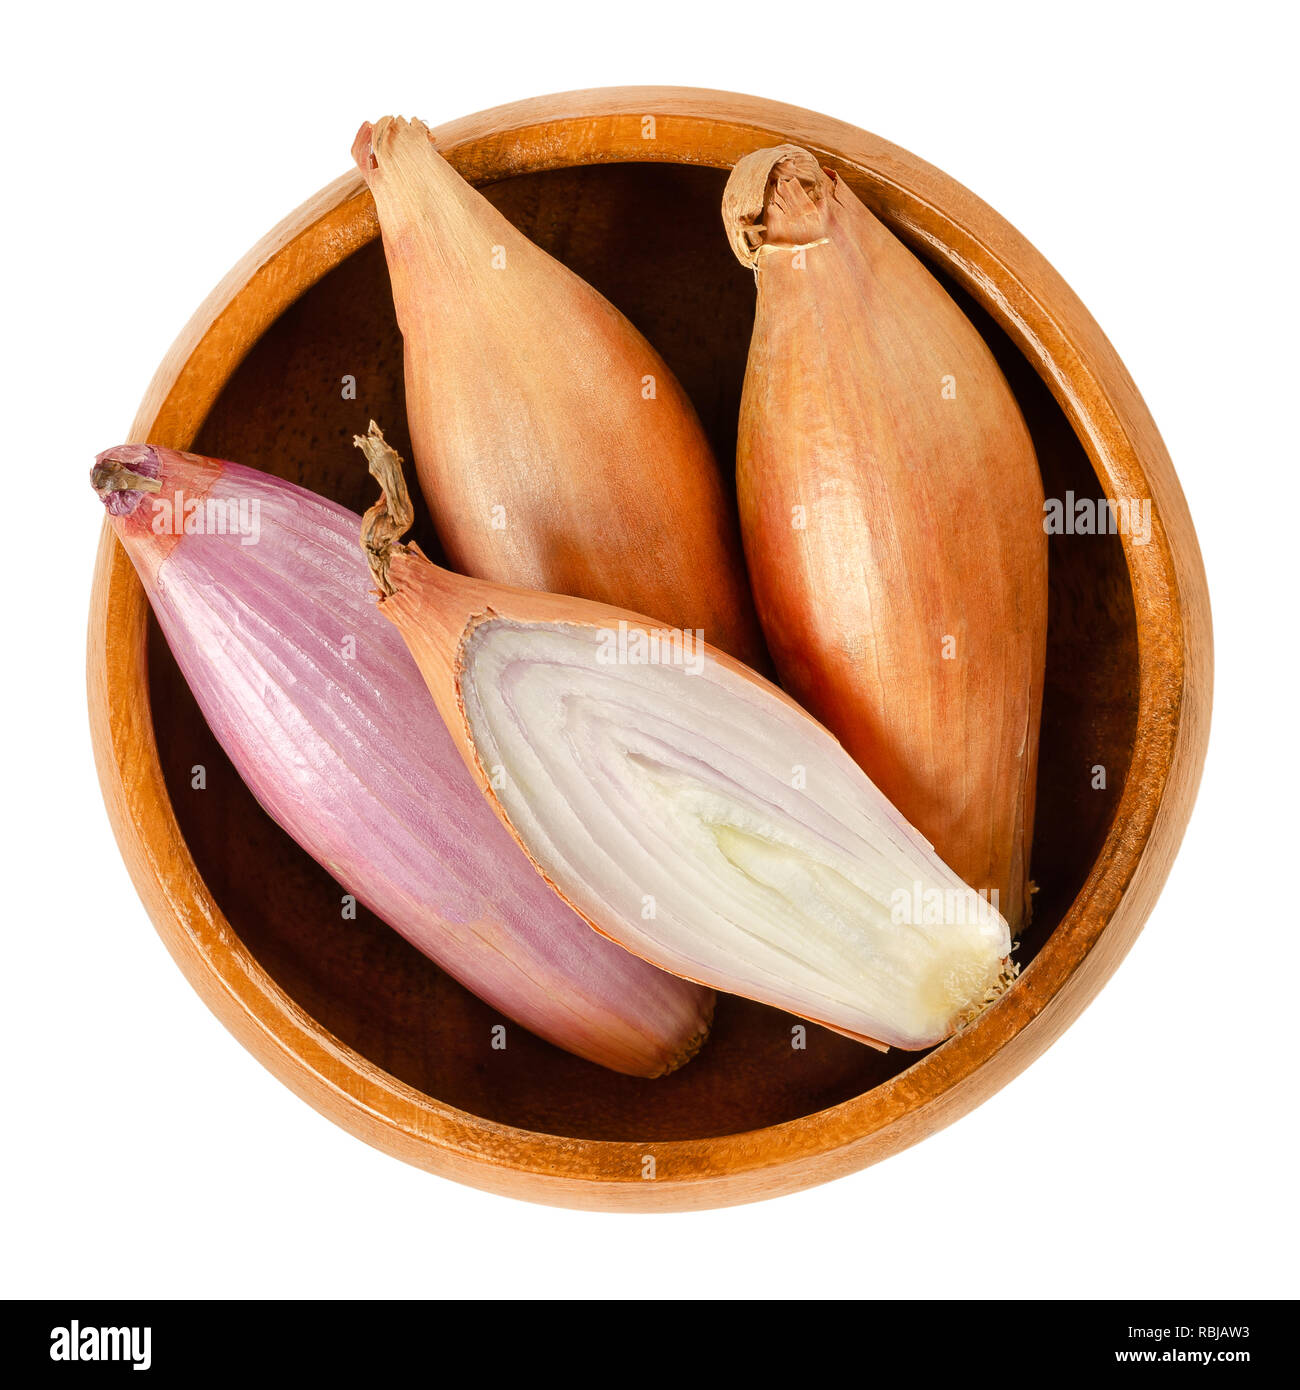 Long shallots, whole and sliced, in wooden bowl. Type of onion, Longor, French variety of Allium cepa. Purple, edible, raw, organic and vegan plant. Stock Photo